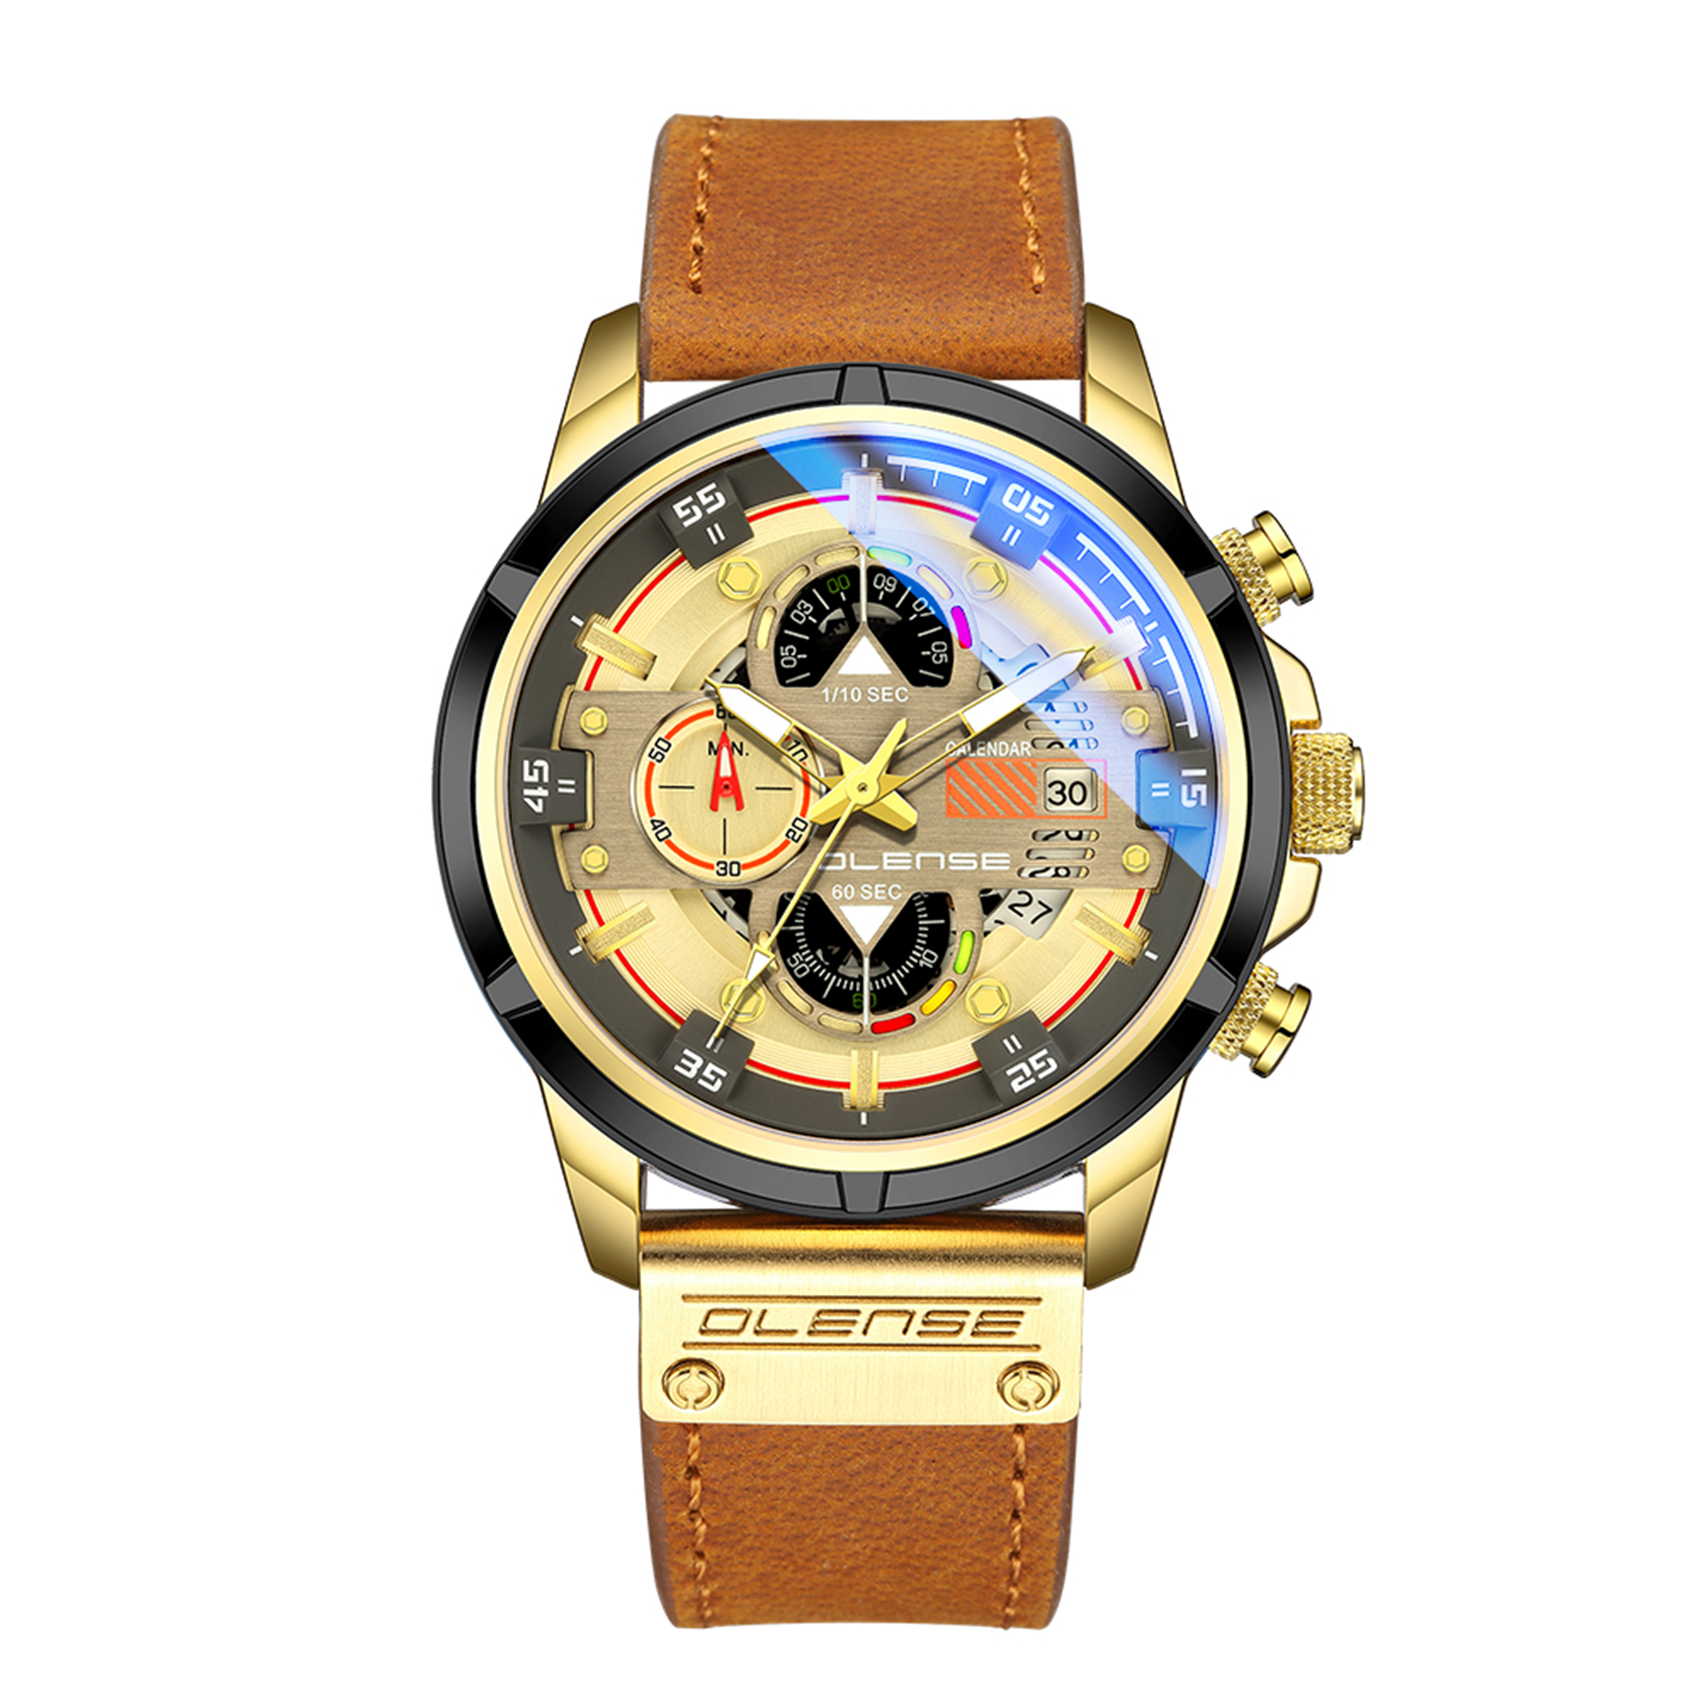 OLENSE - Luxury Wristwatch for Men, 47mm, Gold Dial, Brown Leather Strap